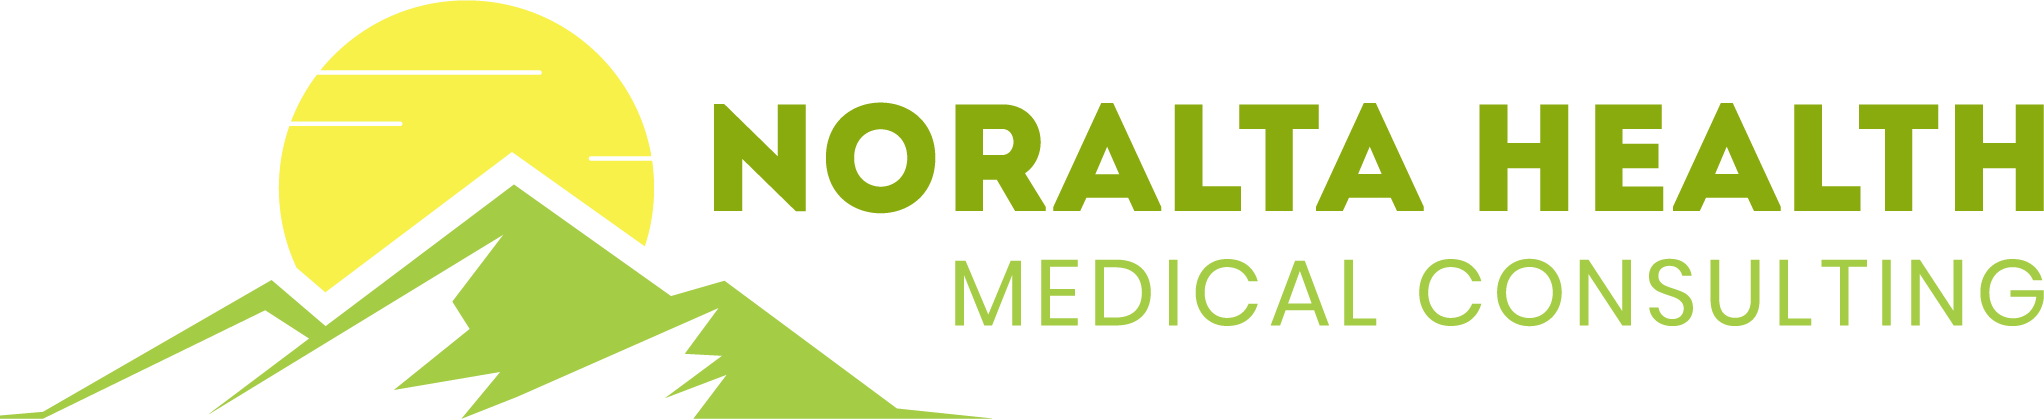 Noralta Health Medical Consulting